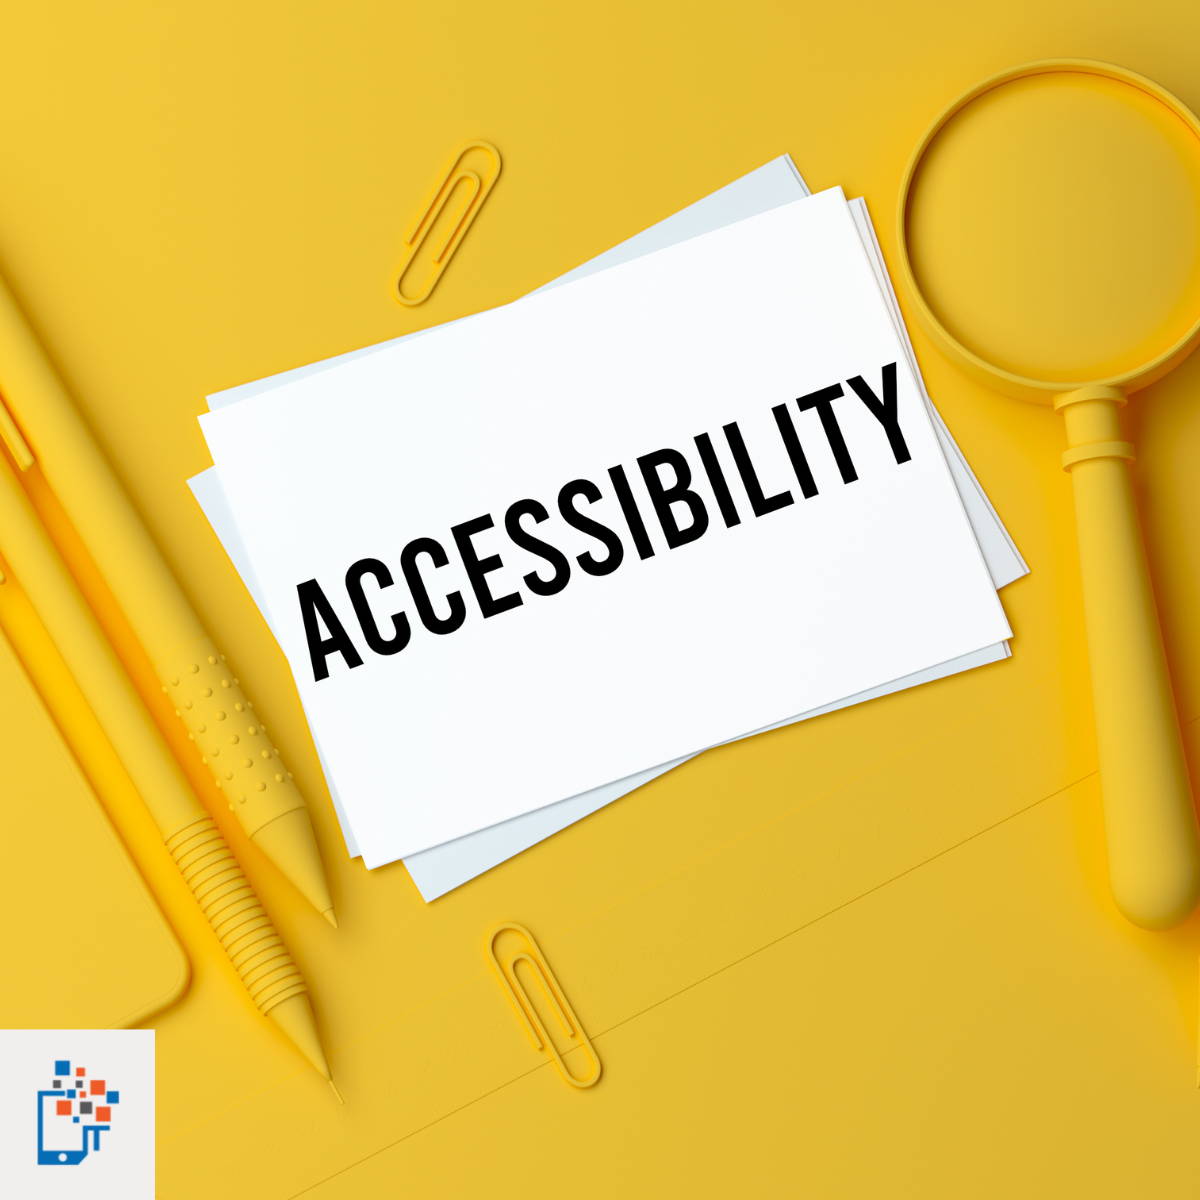 Why is accessibility important?